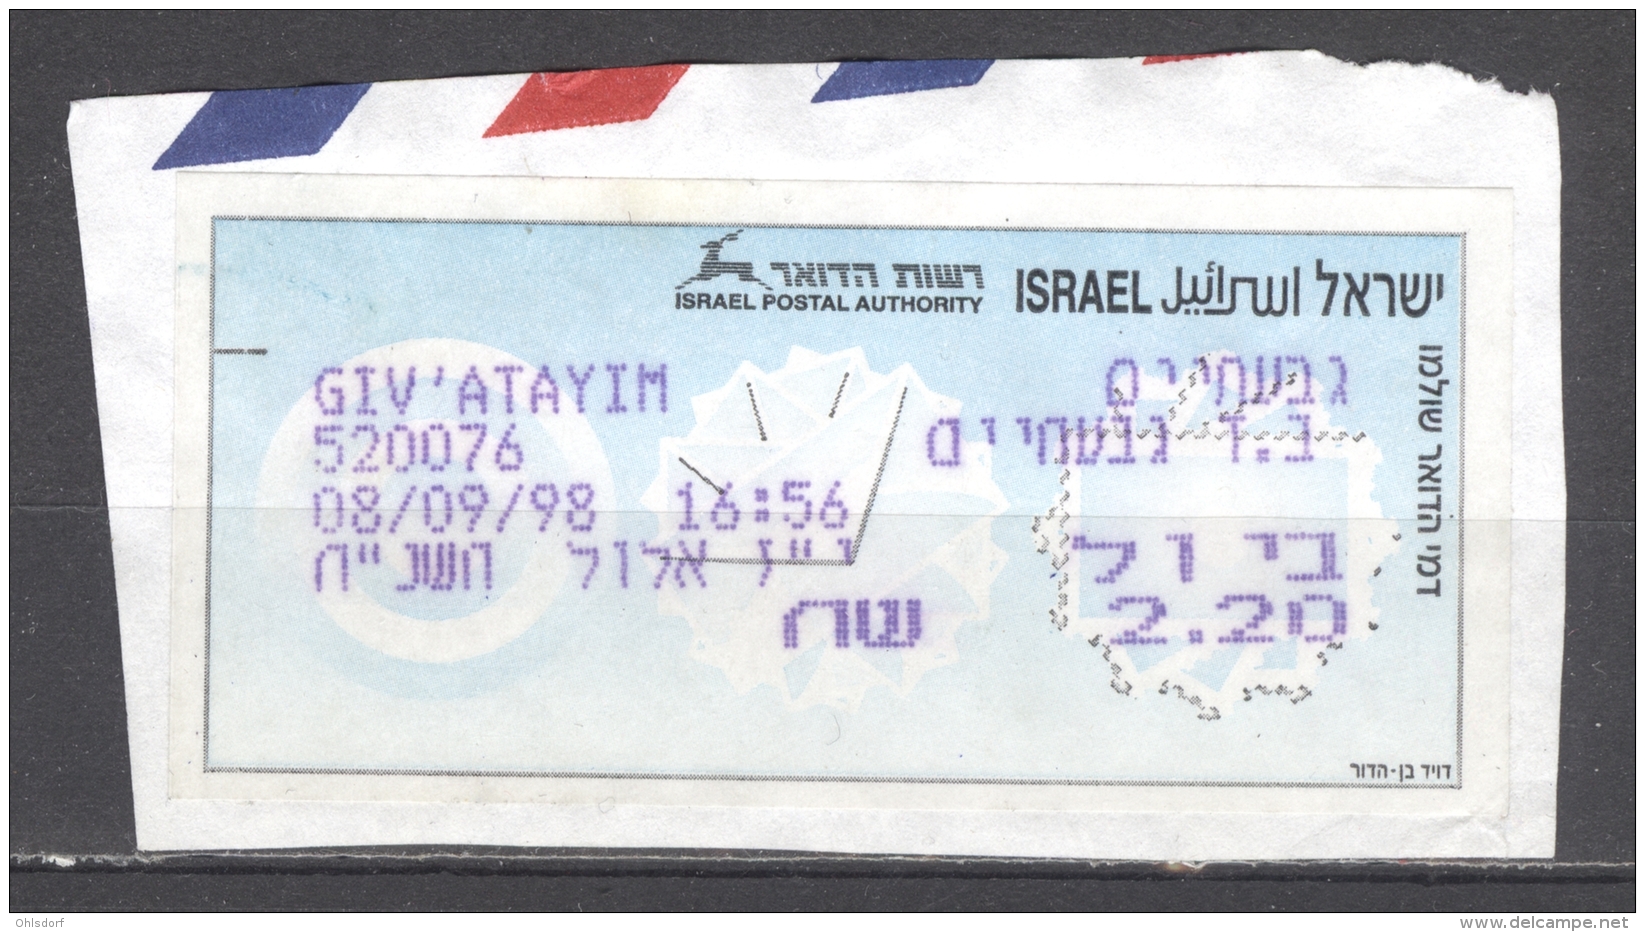 ISRAEL - FRANKING LABELS 1996: YT 15 - FREE SHIPPING ABOVE 10 EURO - Franking Labels